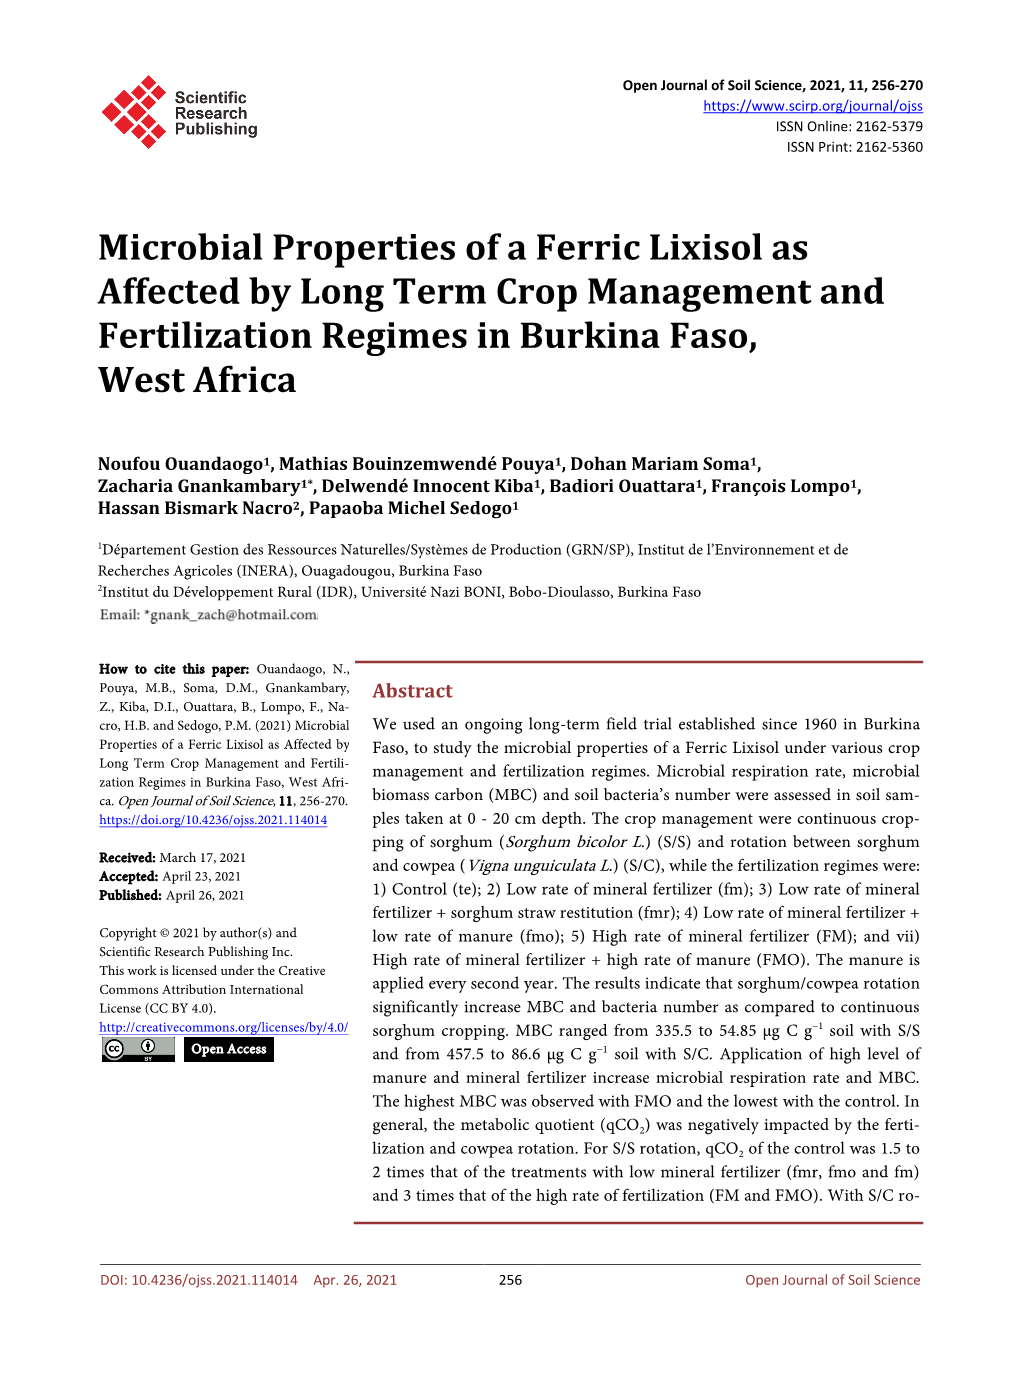 Microbial Properties of a Ferric Lixisol As Affected by Long Term Crop Management and Fertilization Regimes in Burkina Faso, West Africa